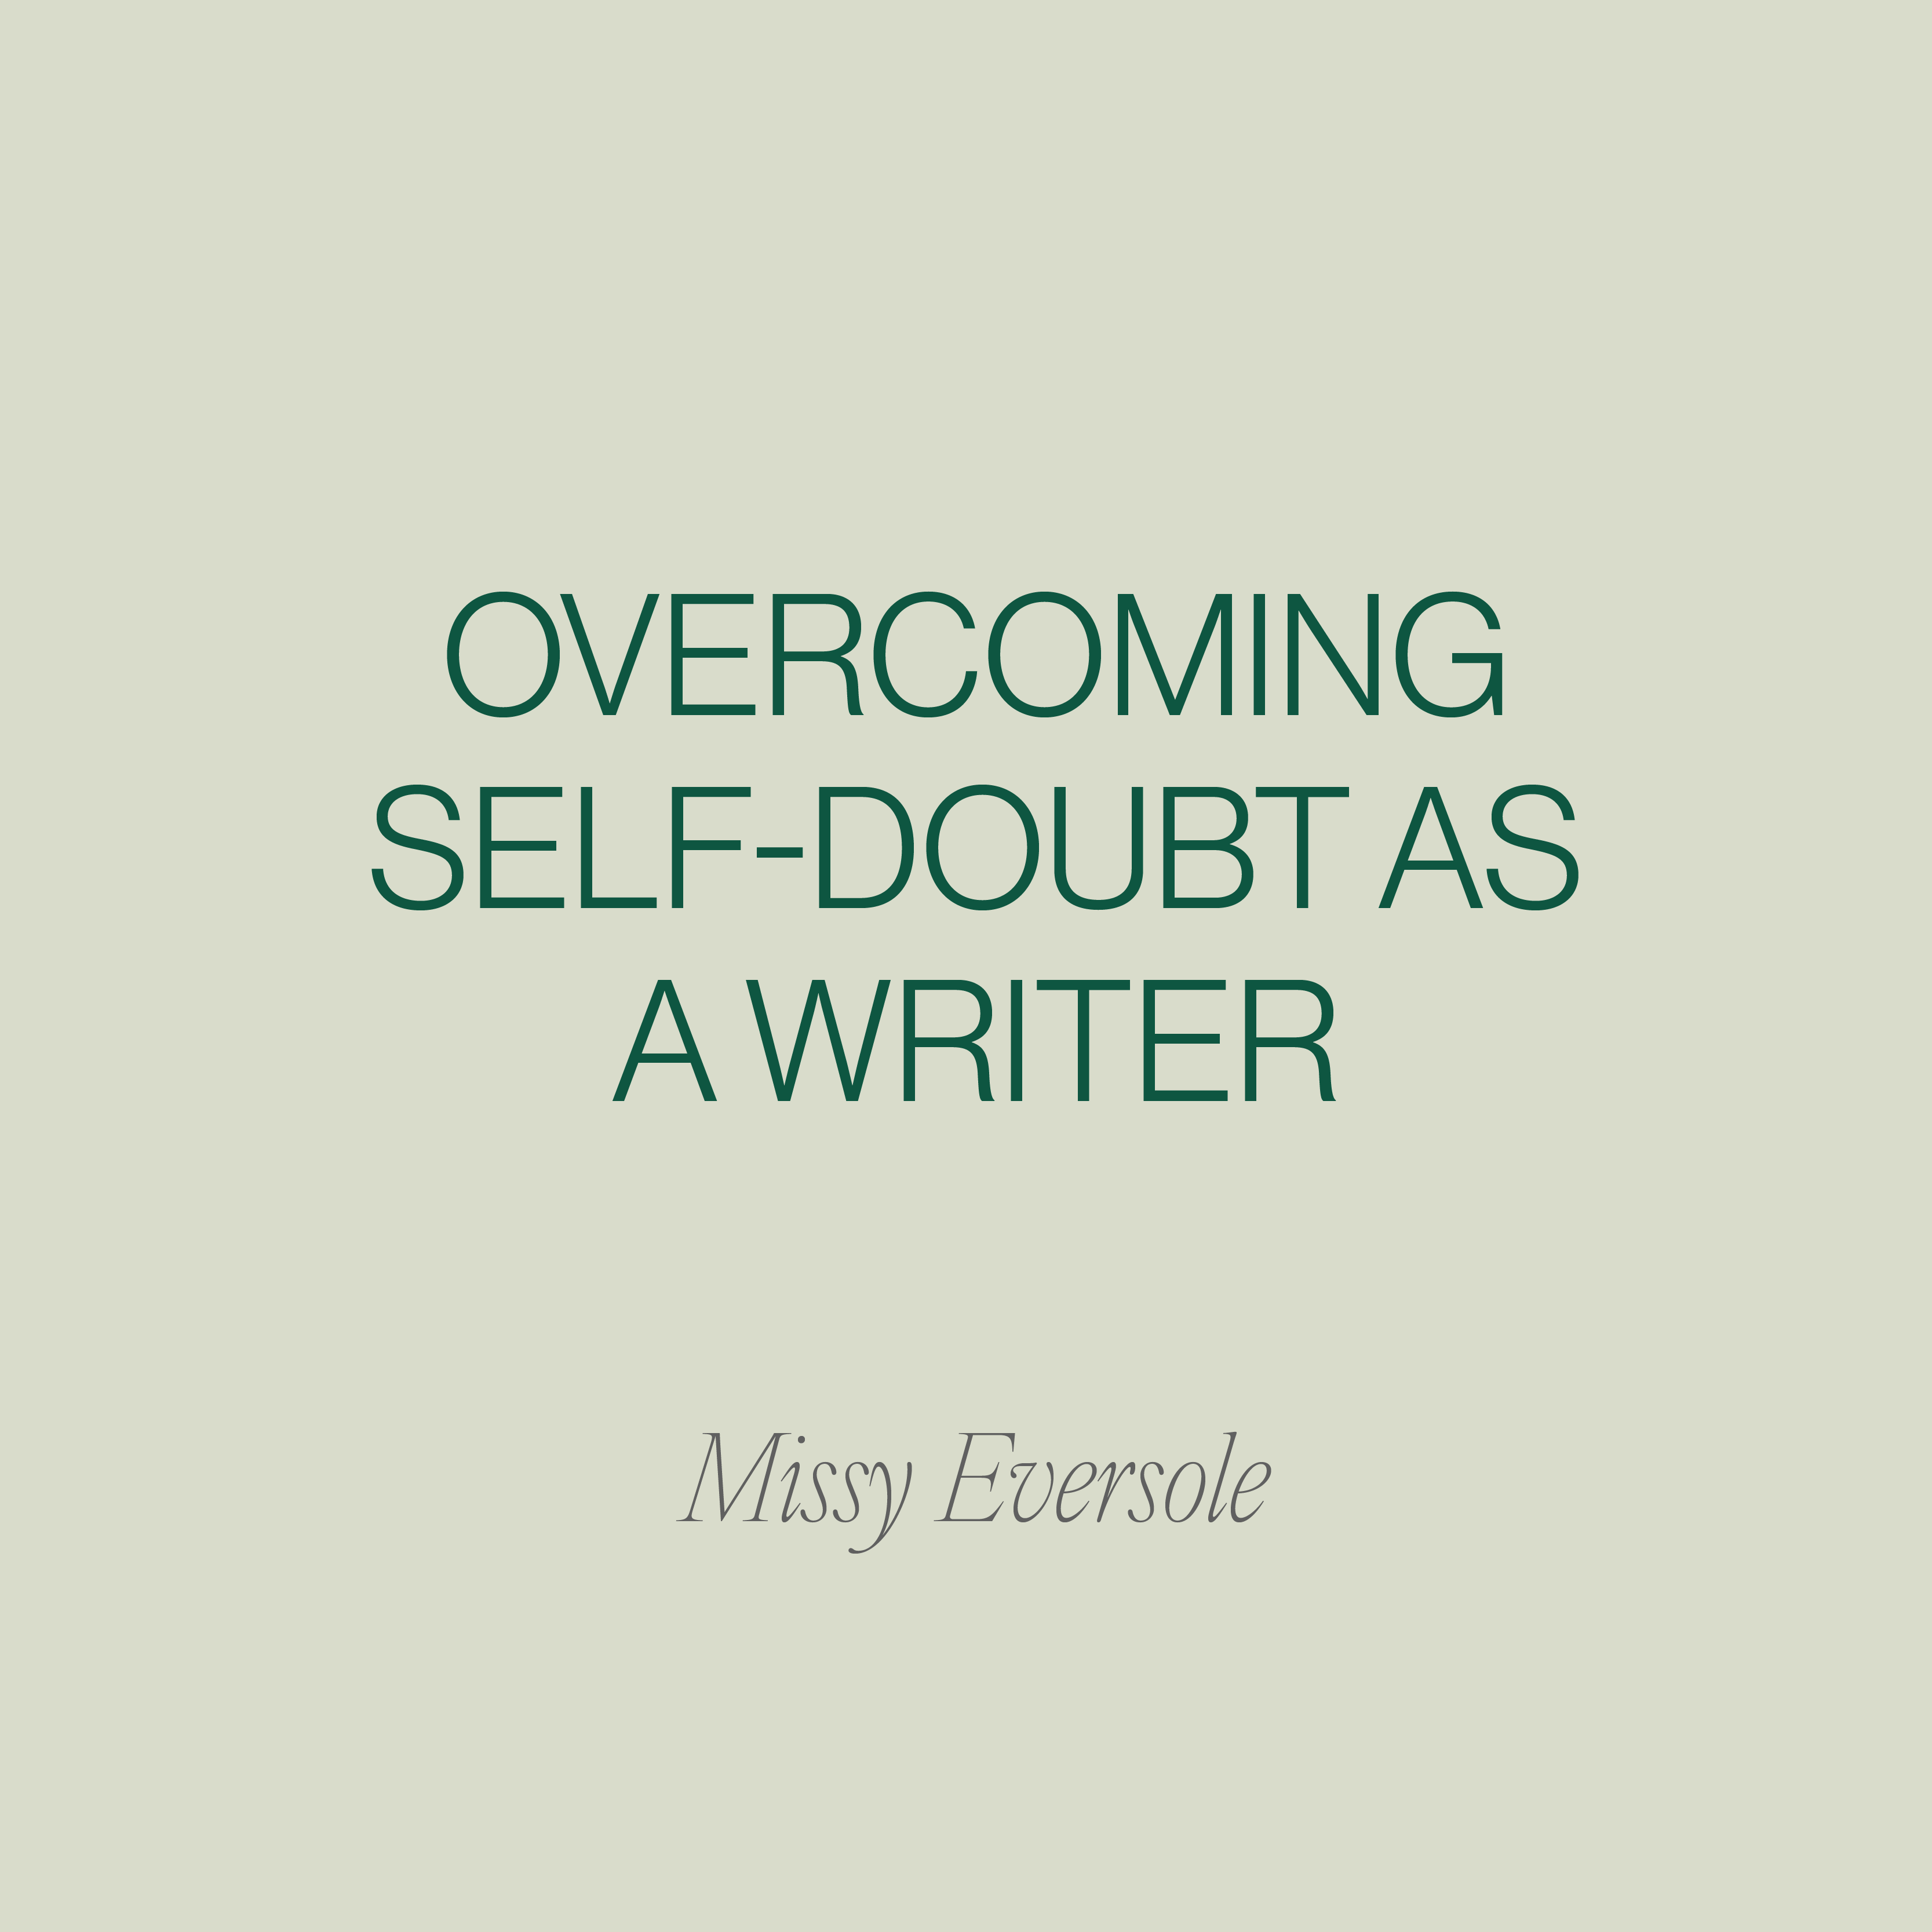 Self-doubt is a part of everyone’s writing journey. By focusing on these four steps, you can kick self-doubt to the curb and get back on track with your writing. Remember: God called you to write, and He is there for you!